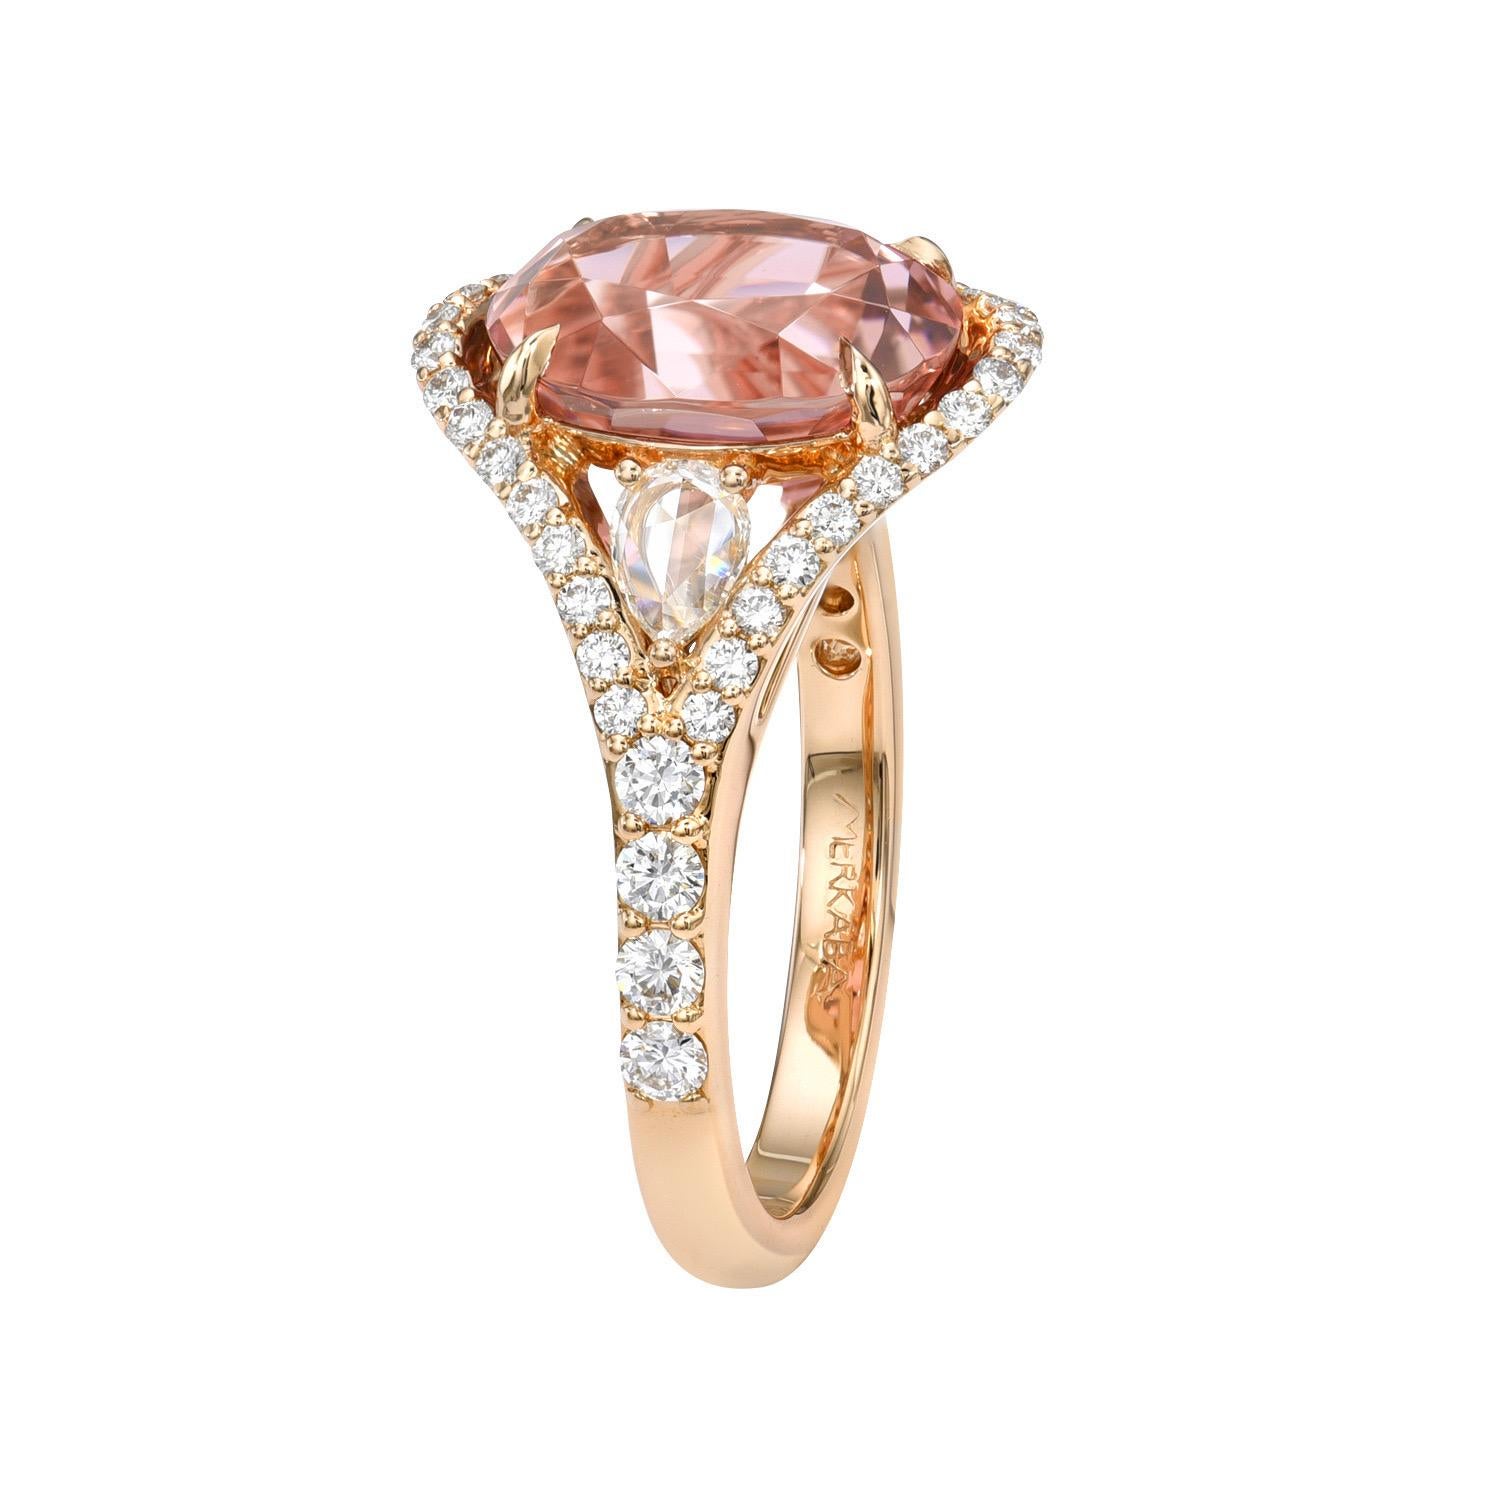 Desirable 4.47 carat Pink Tourmaline oval, 18K rose gold ring, decorated with a pair of 0.21 carat Rose Cut pear shape collection diamonds, and a total of 0.61 carat collection round brilliant diamonds. 
Ring size 6.5. Resizing is complementary upon